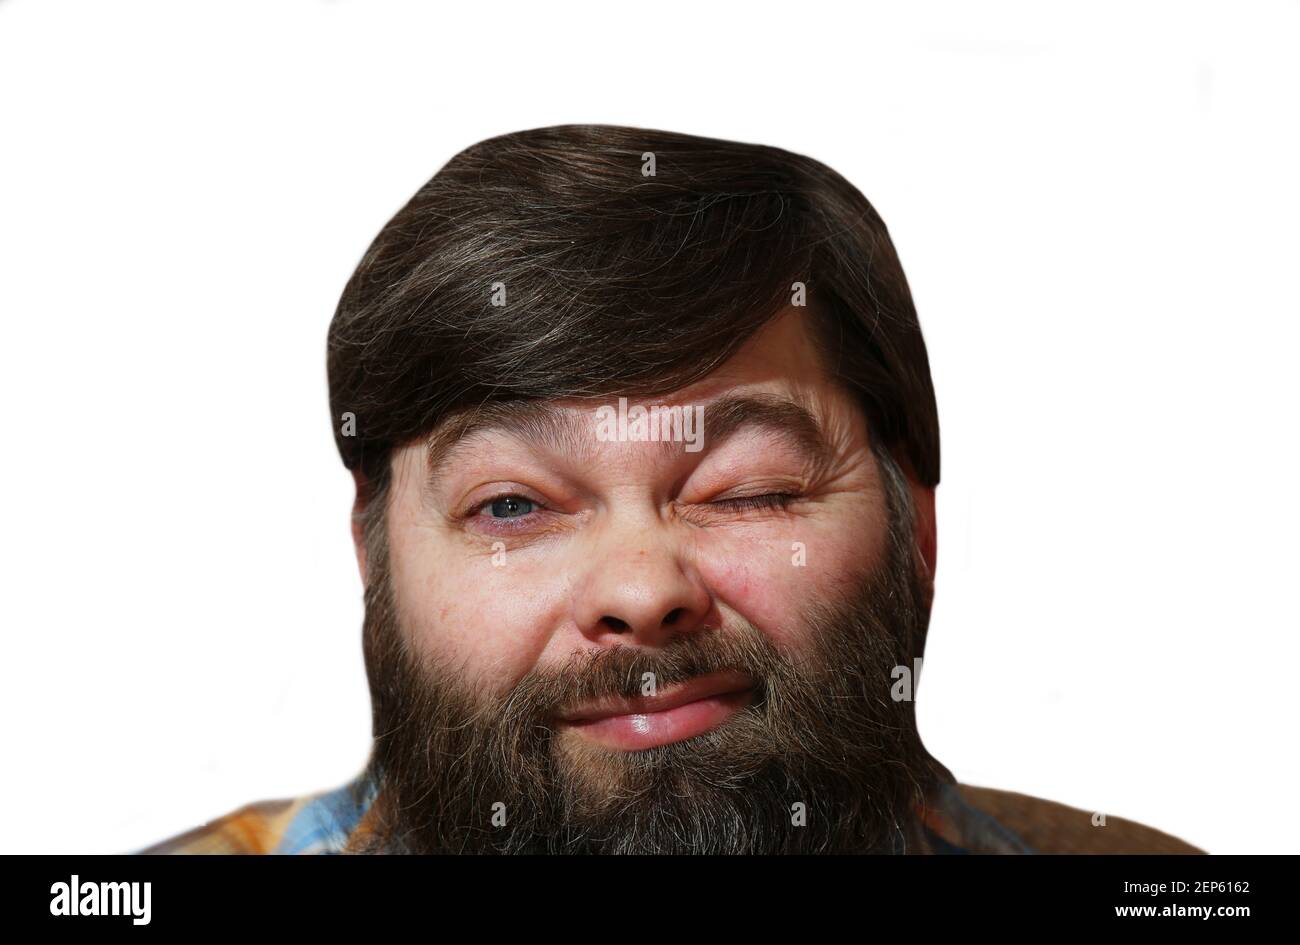 The man with the thick, long beard squeezed one eye shut. Close-up. Isolated. Friendliness. Affability. Positive facial expressions. Stock Photo